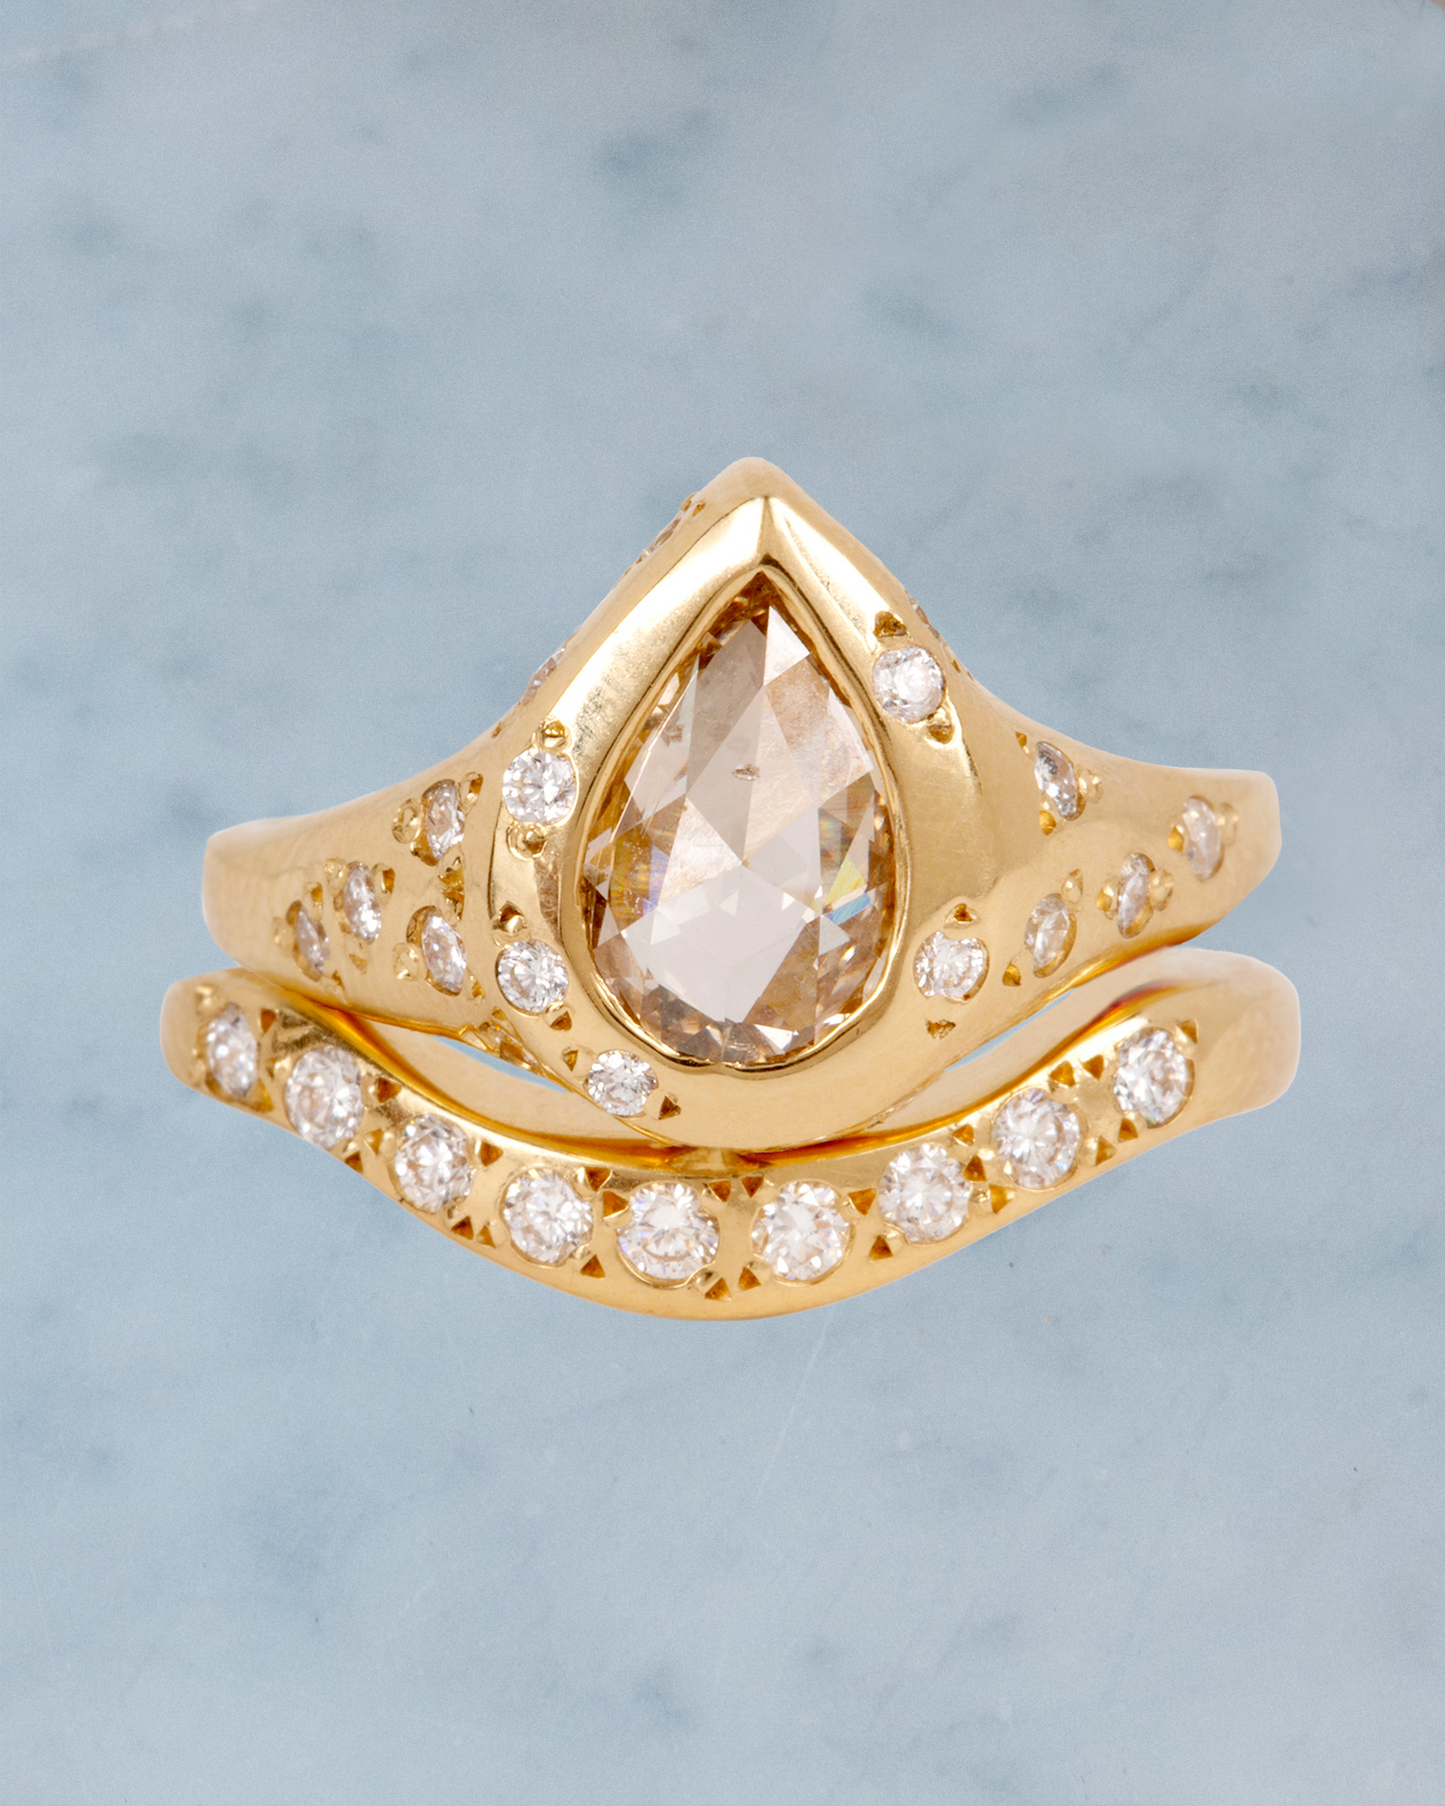 A rose cut, pear shaped, rustic diamond is set in a ring covered in round white diamond stars.